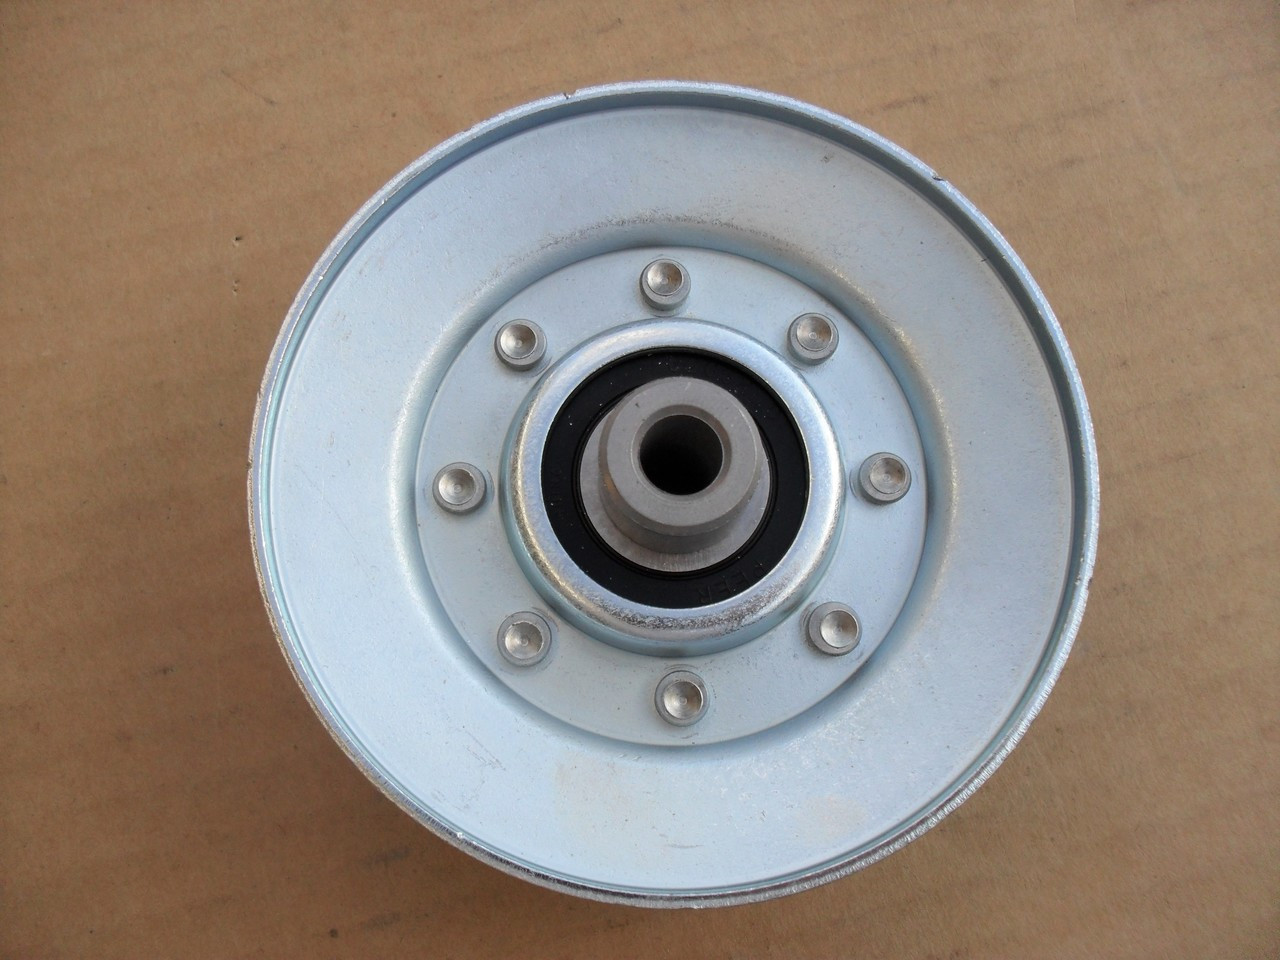 Idler Pulley for Gilson 24445 ID: 3/8" OD: 4"